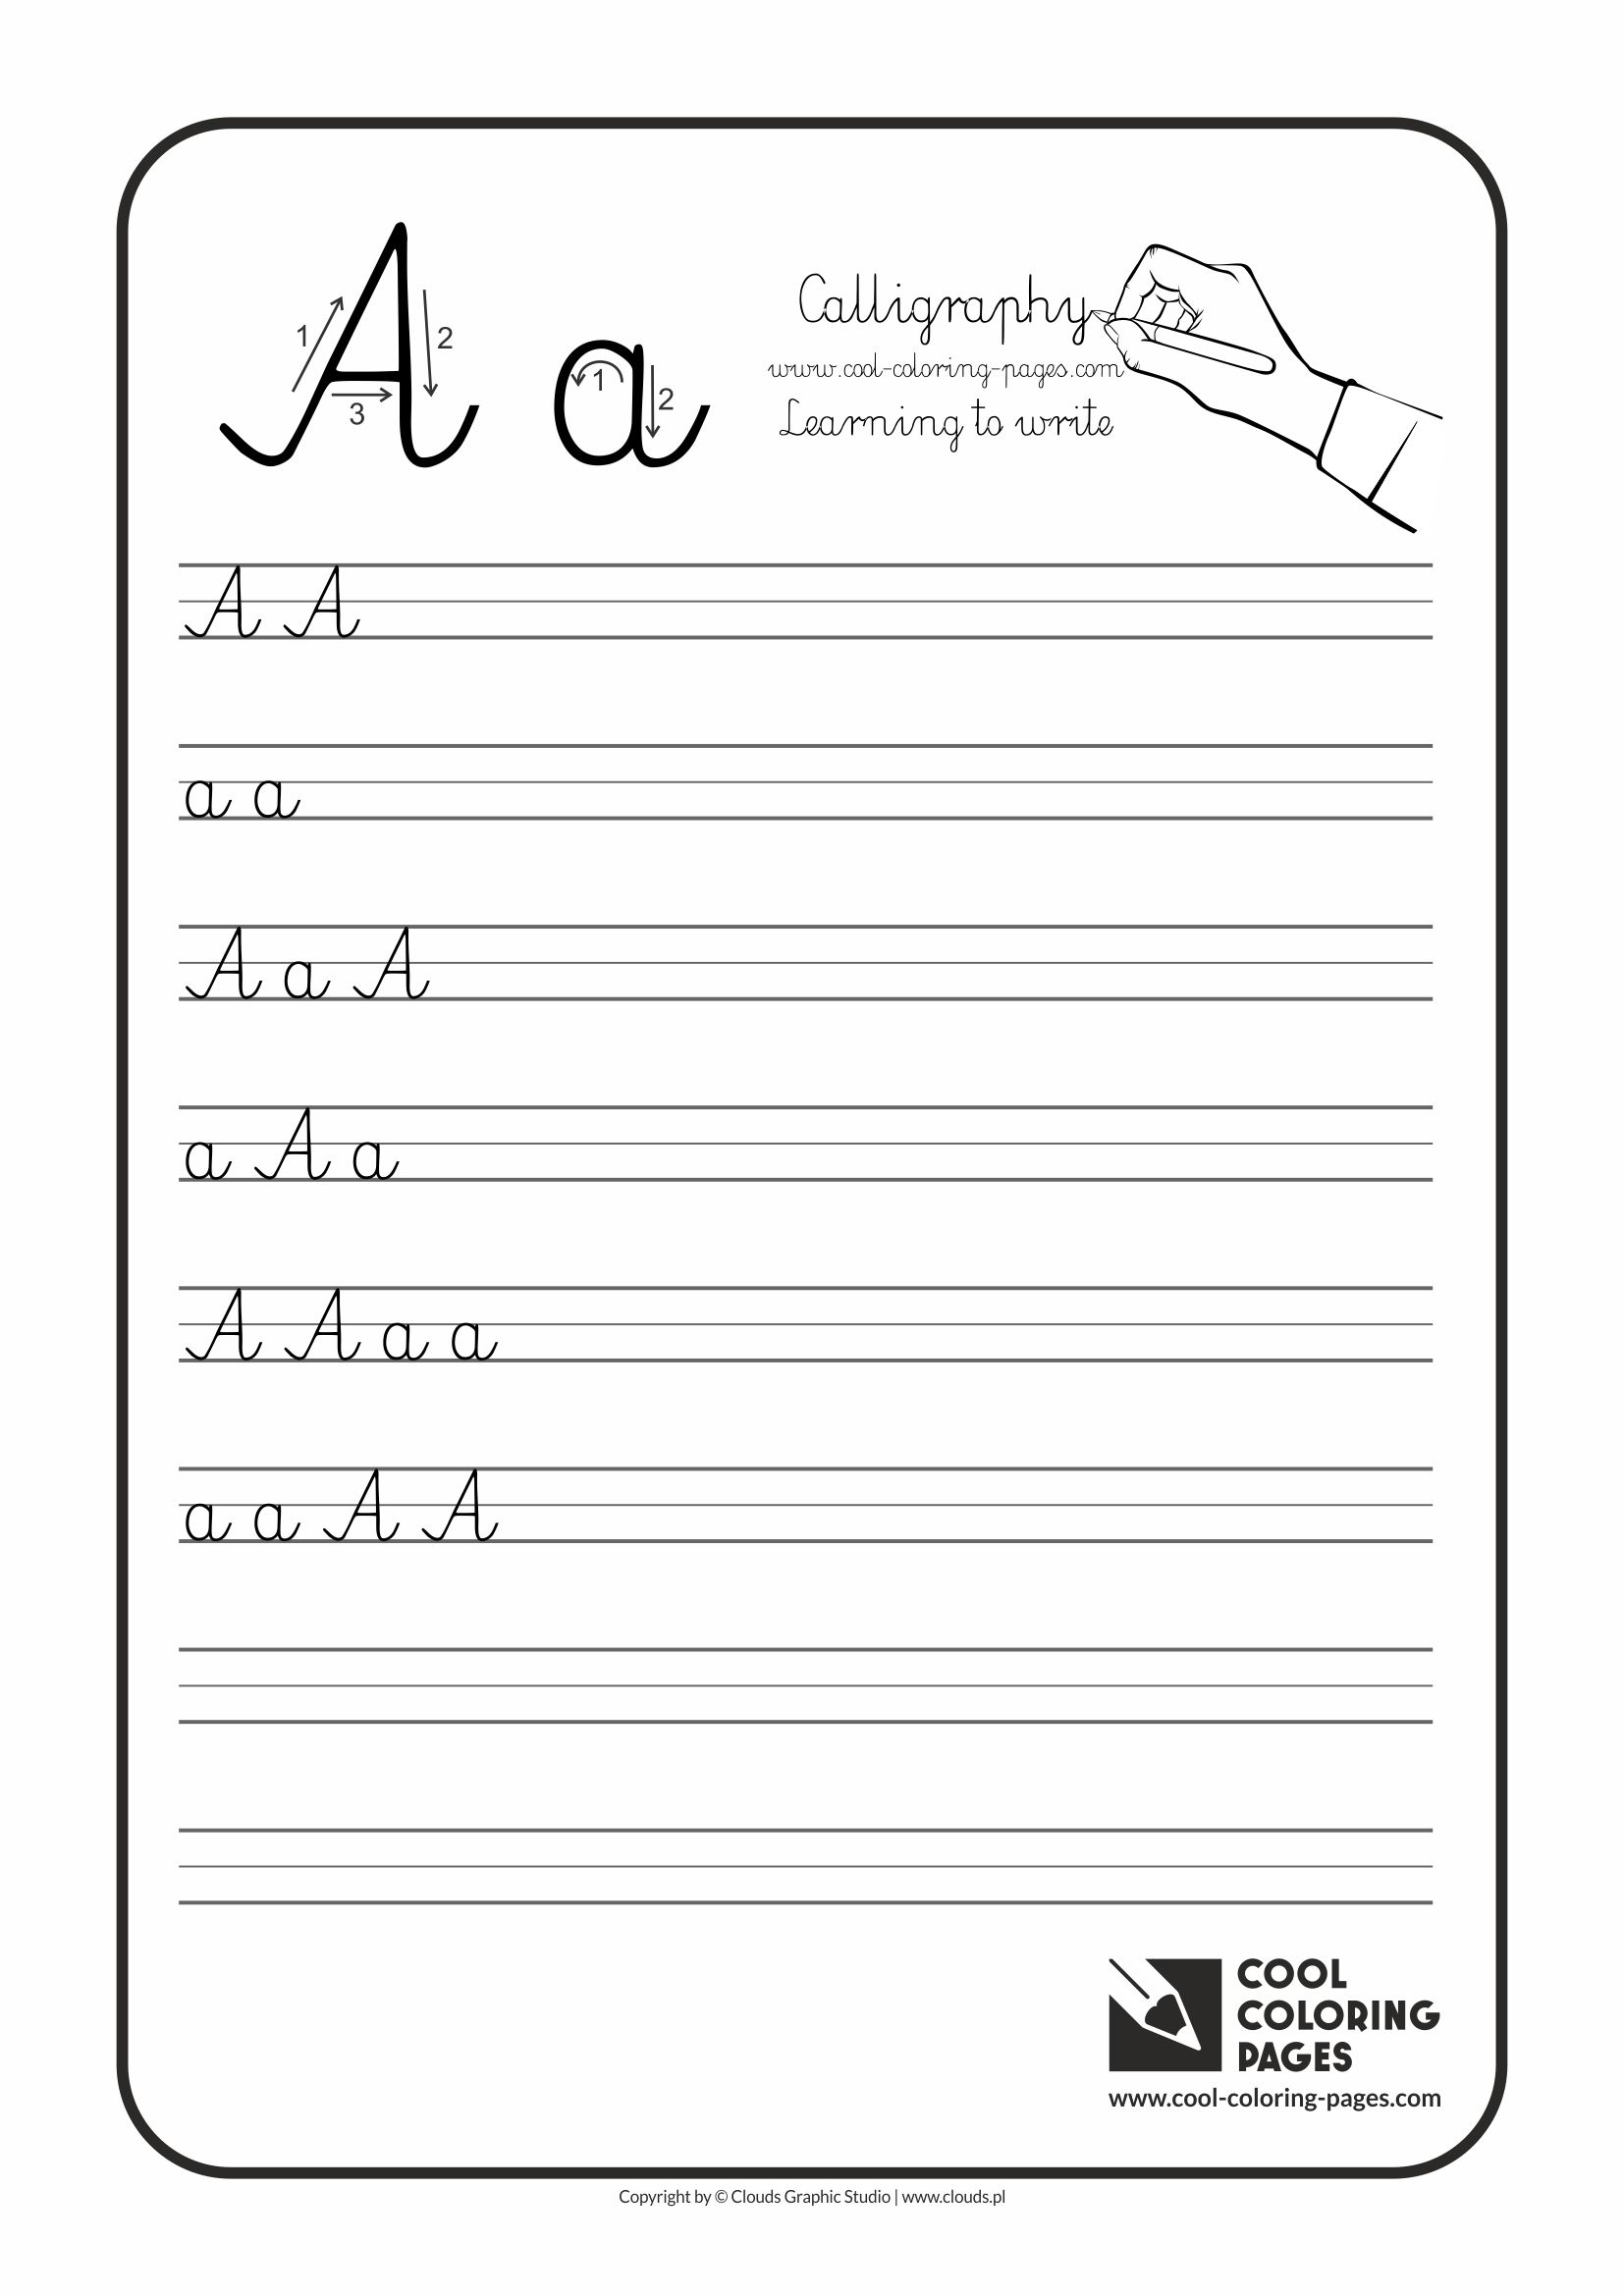 Cool Coloring Pages / Calligraphy / Letter A - Handwriting for kids / Worksheets